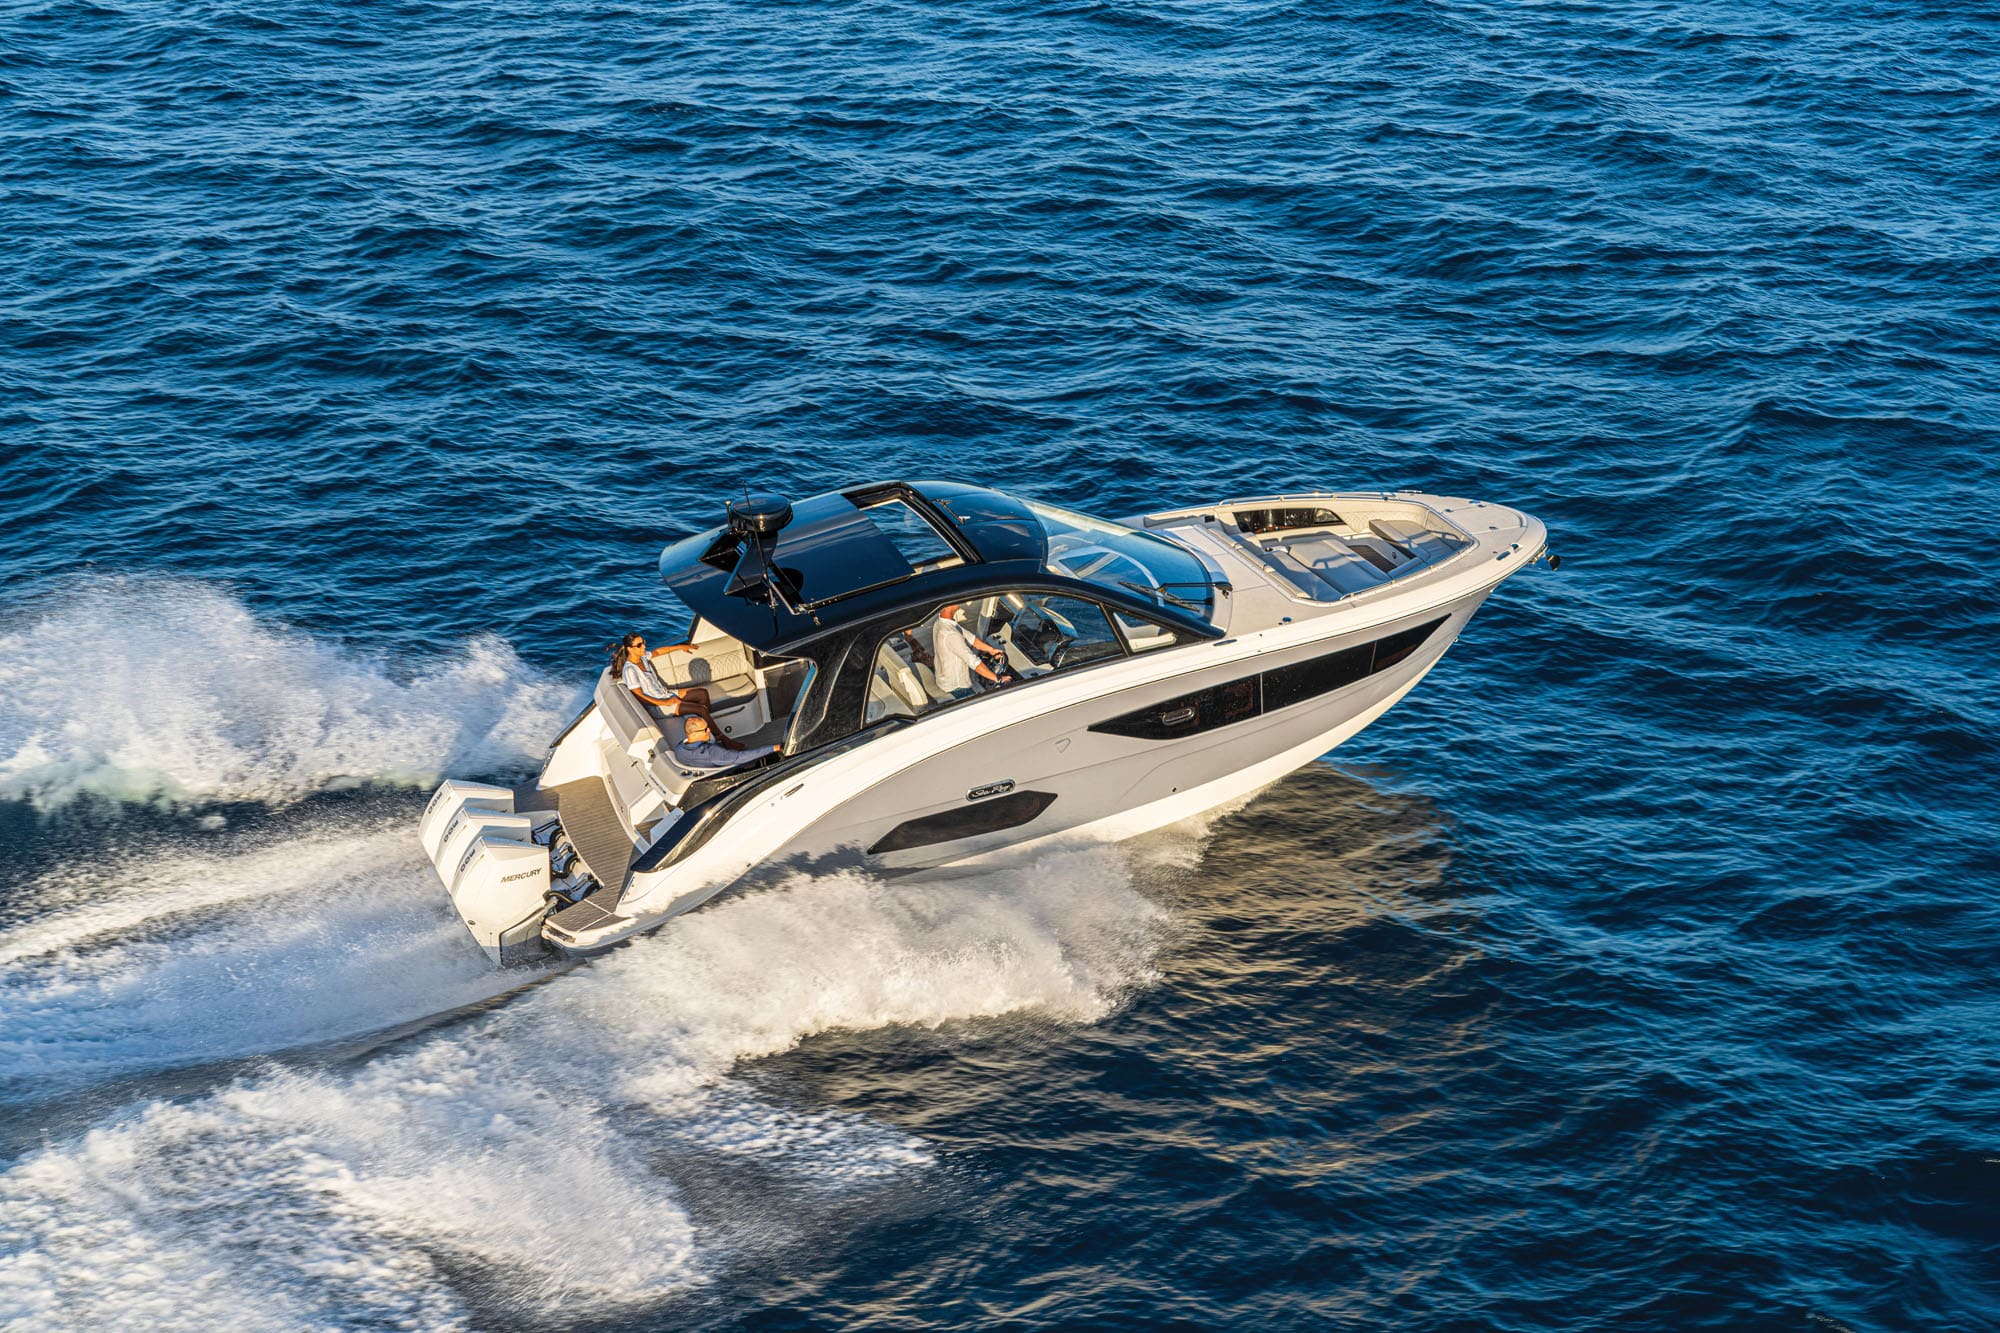 2021 Sea Ray Sundancer 370 Outboard Boat Test, Pricing, Specs